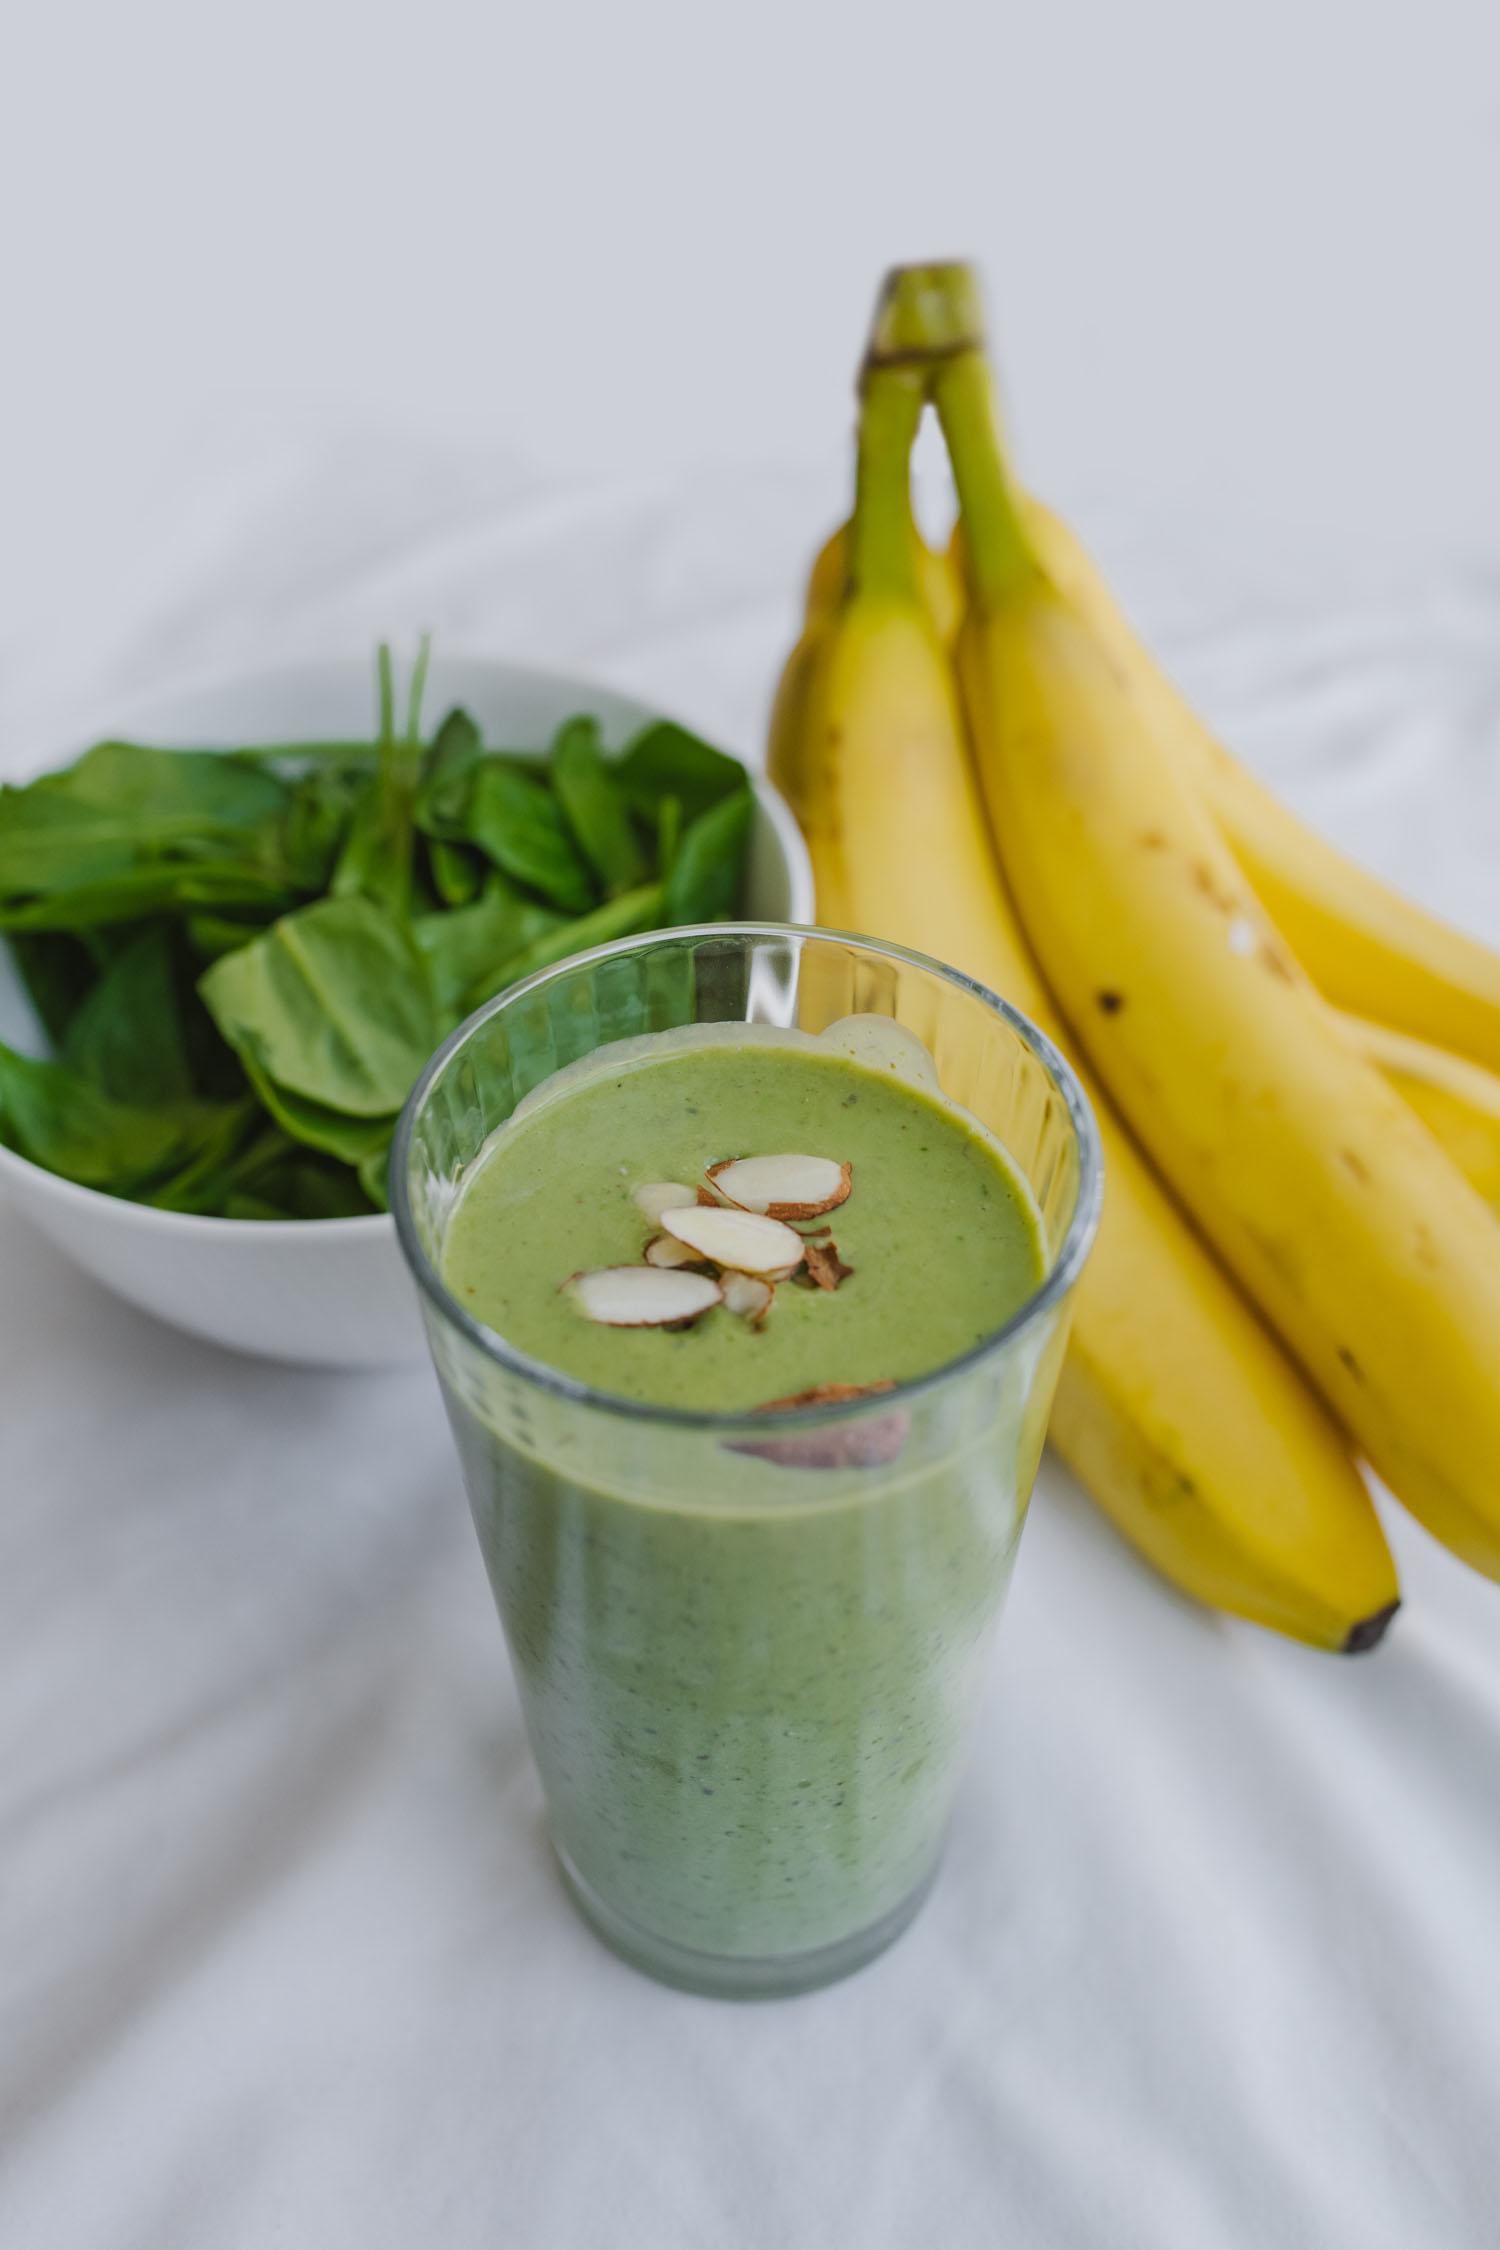 Bunch of bananas, a green smoothie, and a bowl of greens.